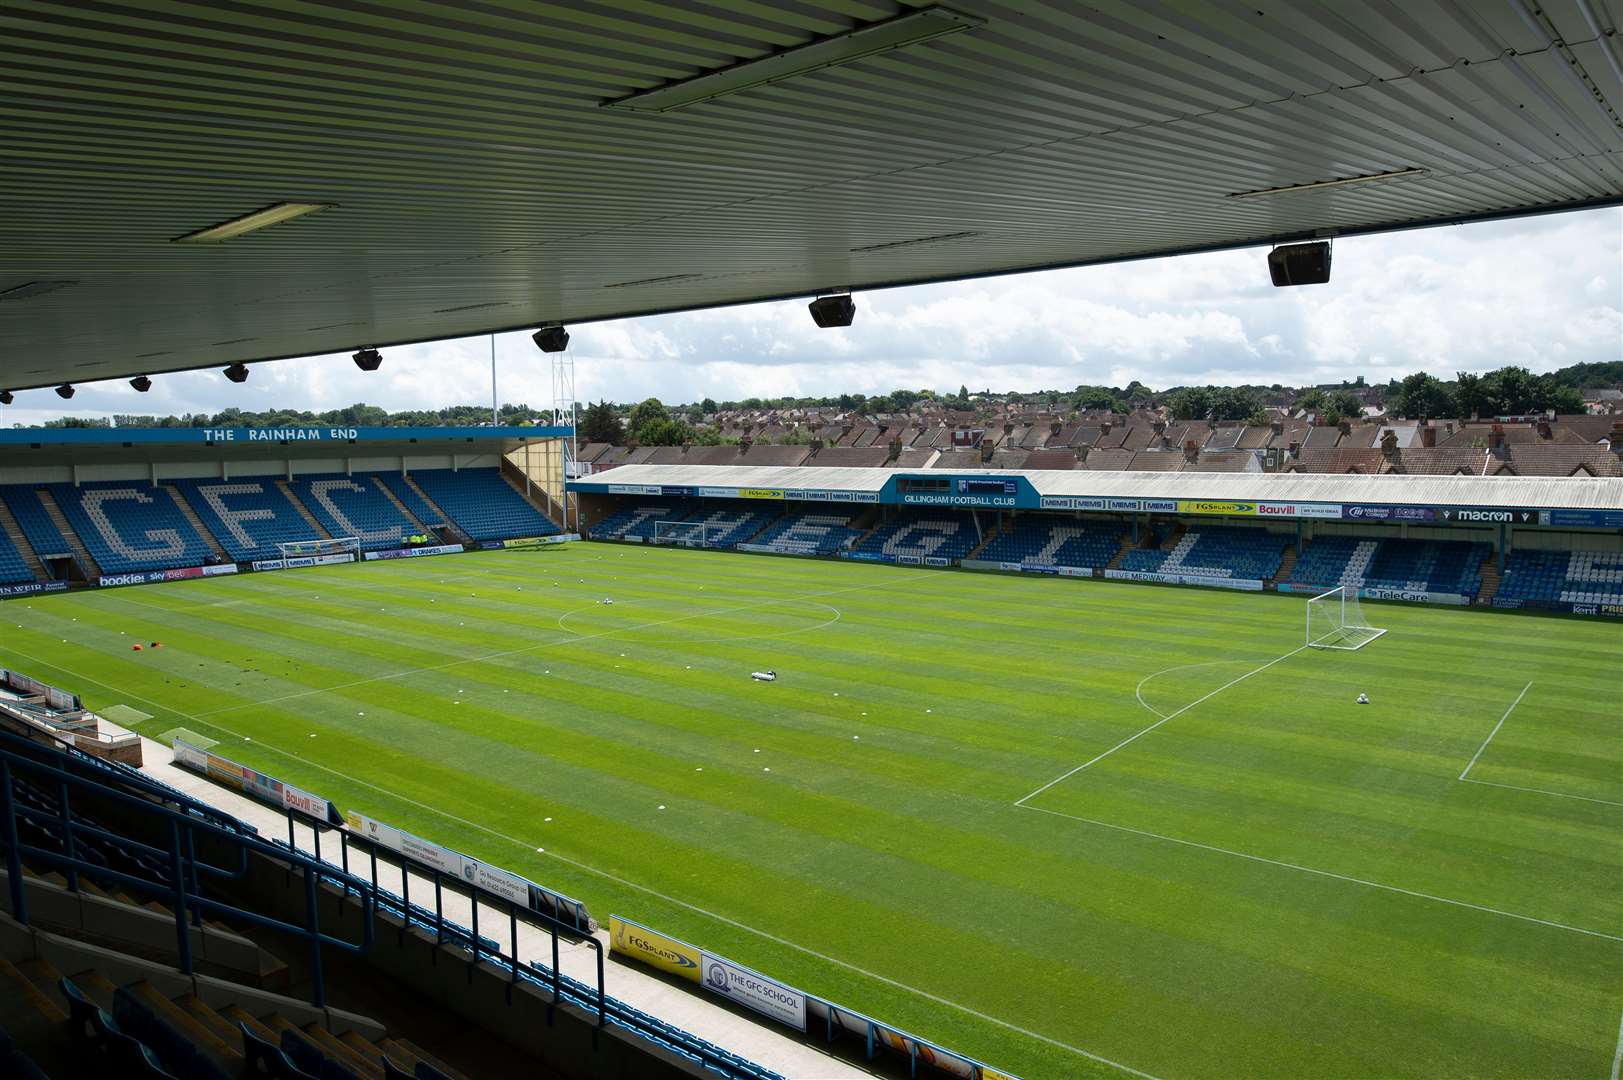 The new Rainham End and Gordon Road Stand at the Priestfield